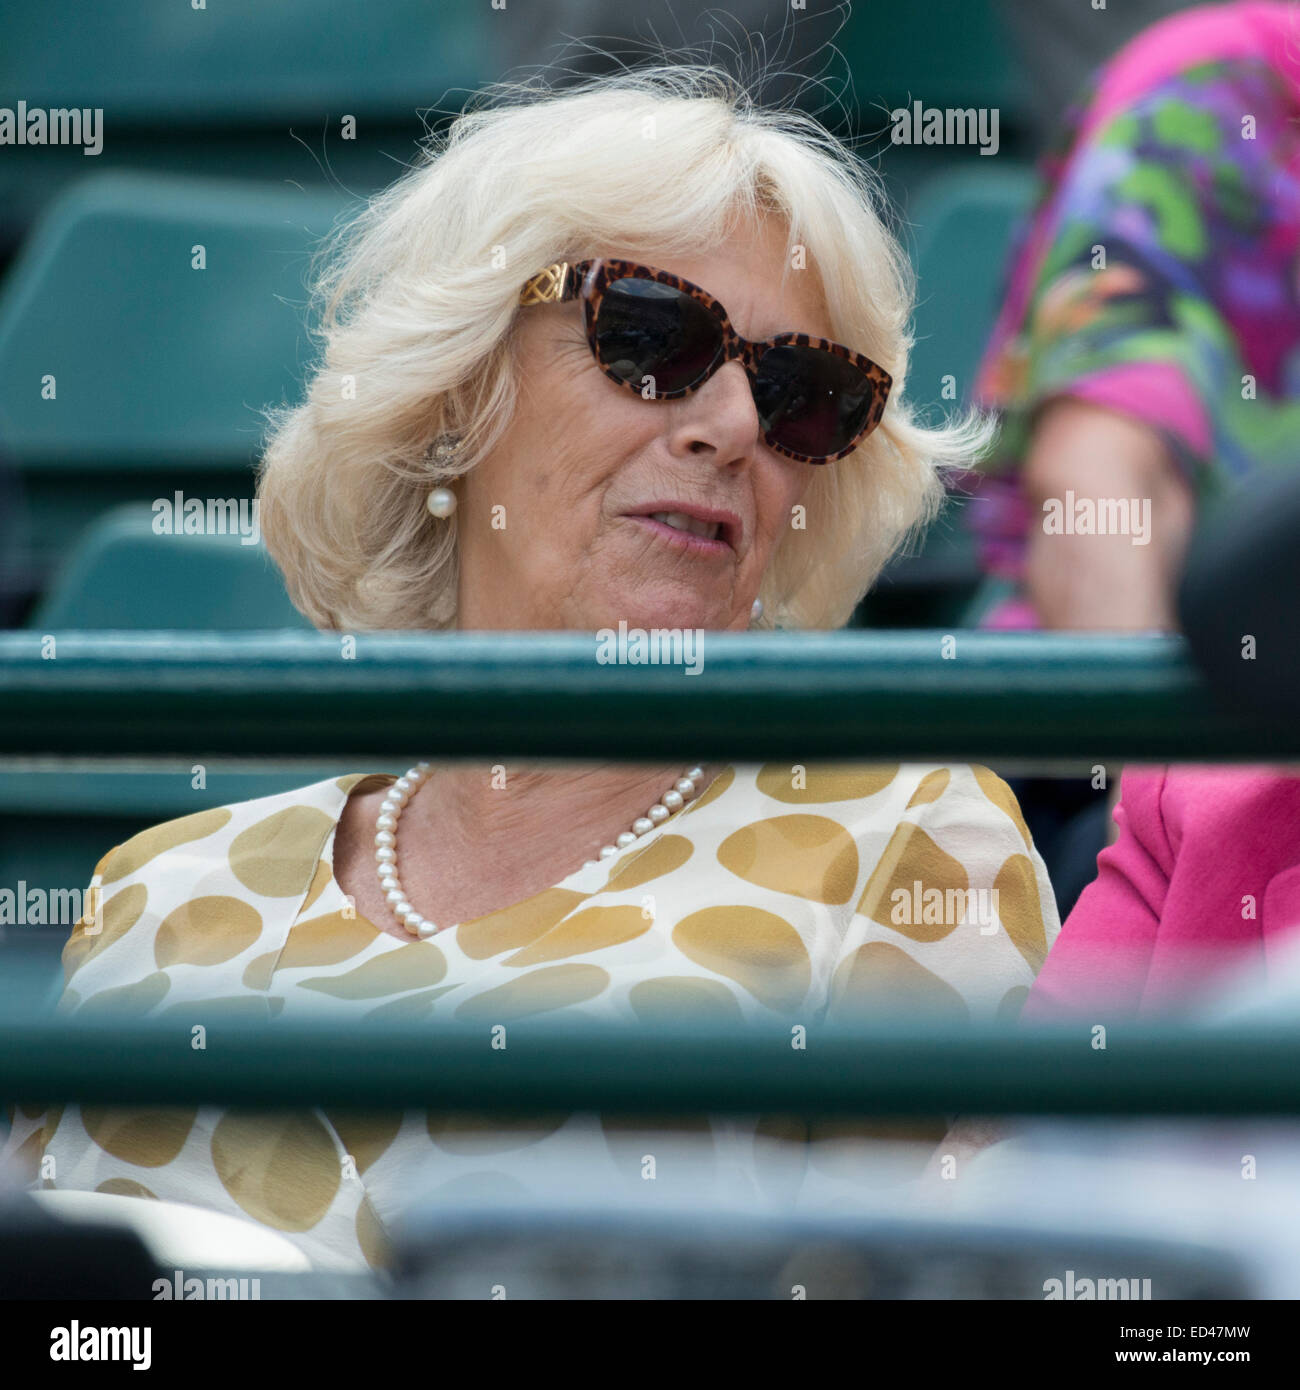 25.06.2014. The Wimbledon Tennis Championships 2014 held at The All England Lawn Tennis and Croquet Club, London, England, UK. General View. HRH The Duchess of Cornwall ("Camilla") leaves the Royal Box to watch the Murray match from the stands of No1 Cour Stock Photo